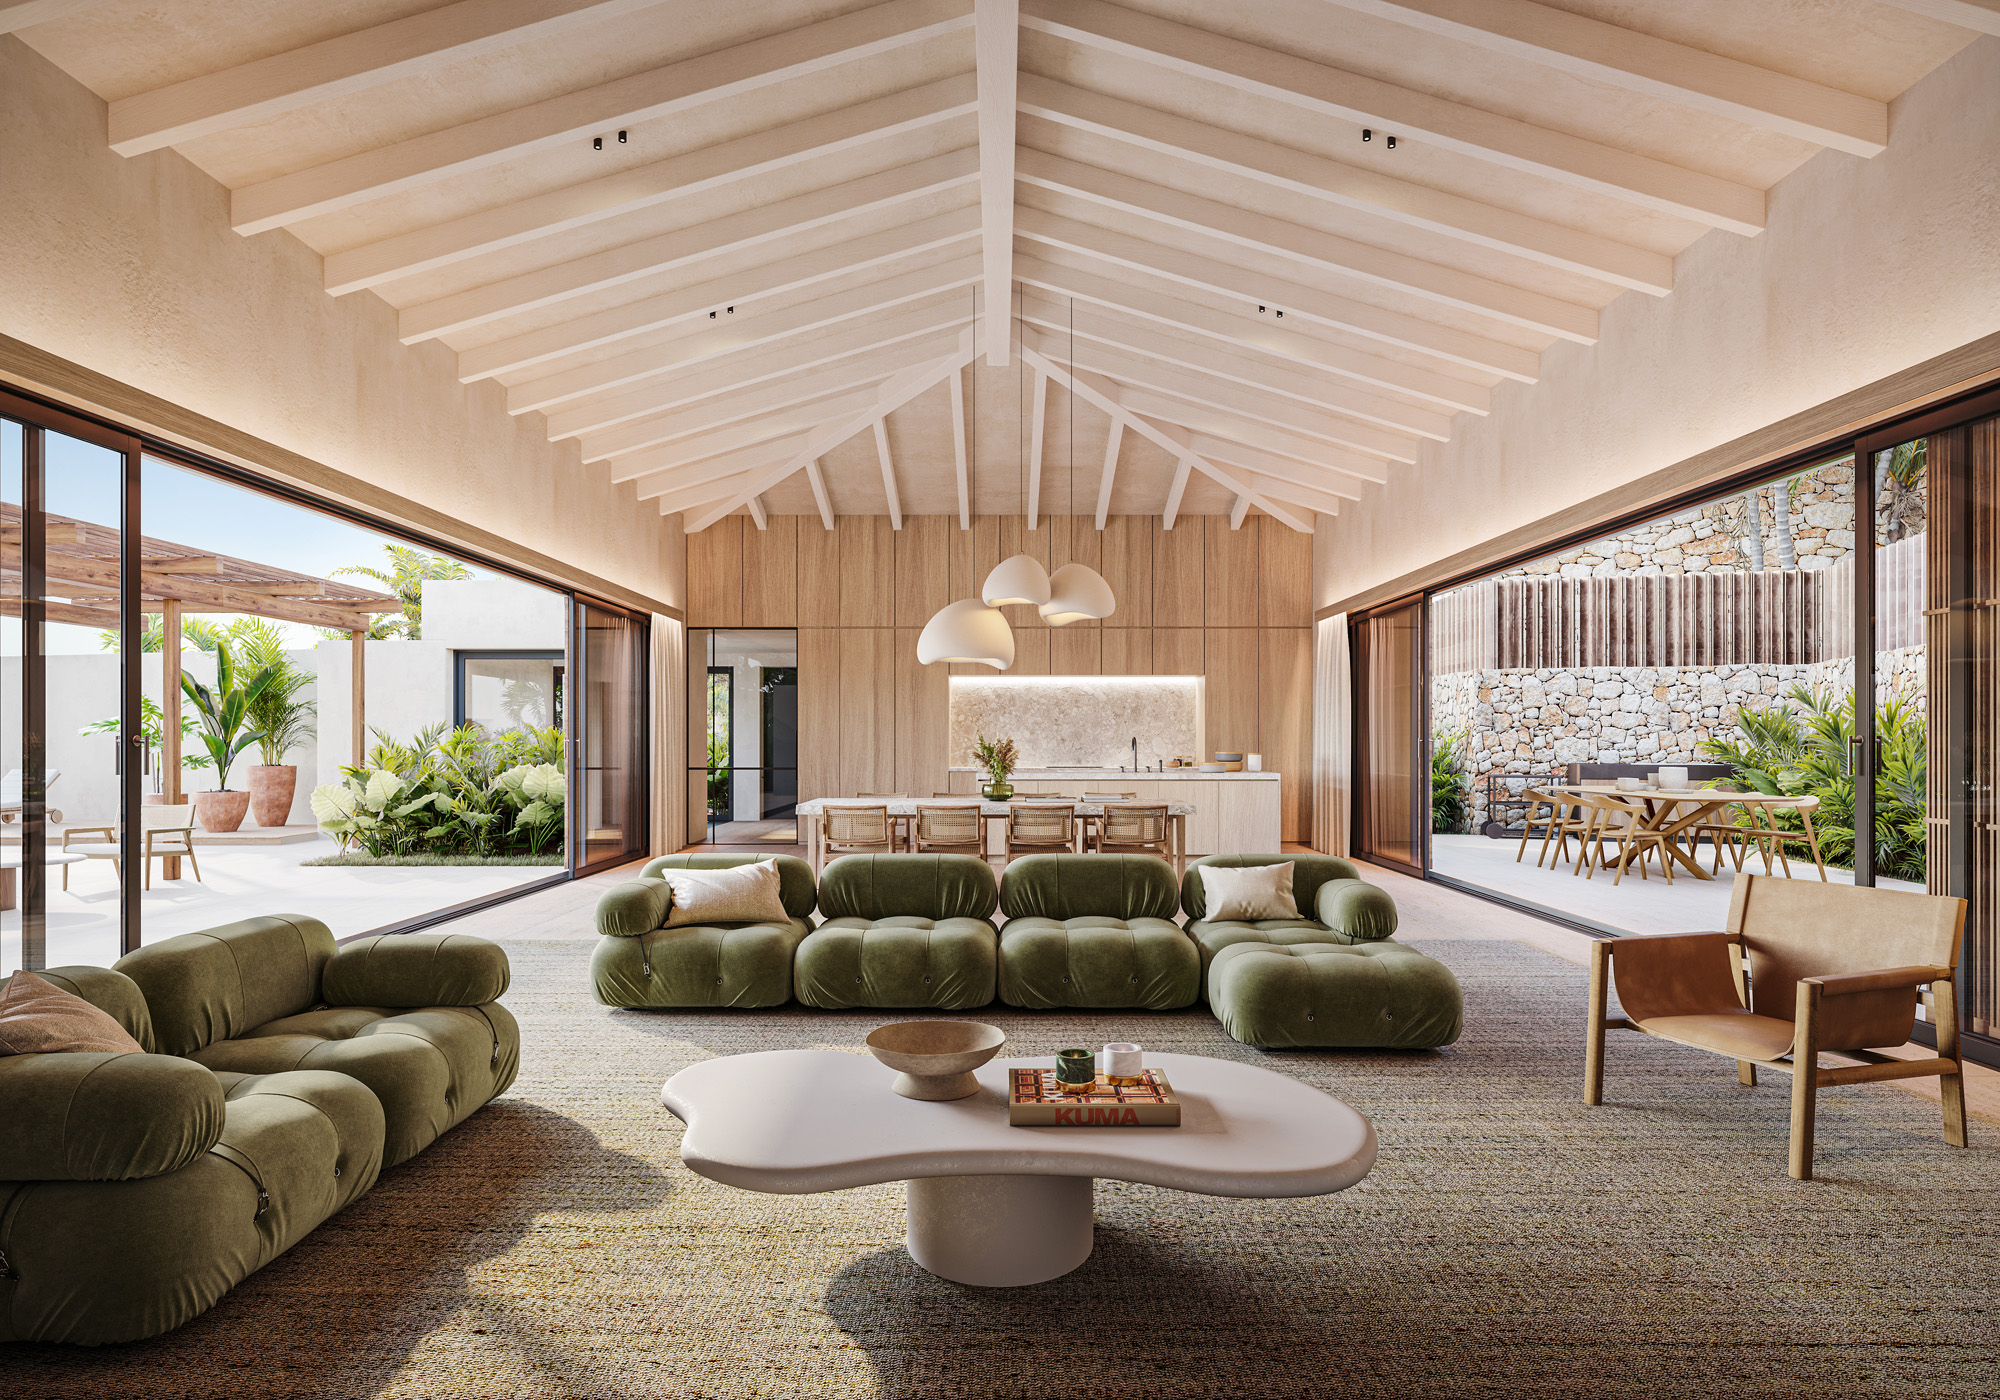 Render showing the sculptural interior of a luxury villa for sale in Ibiza